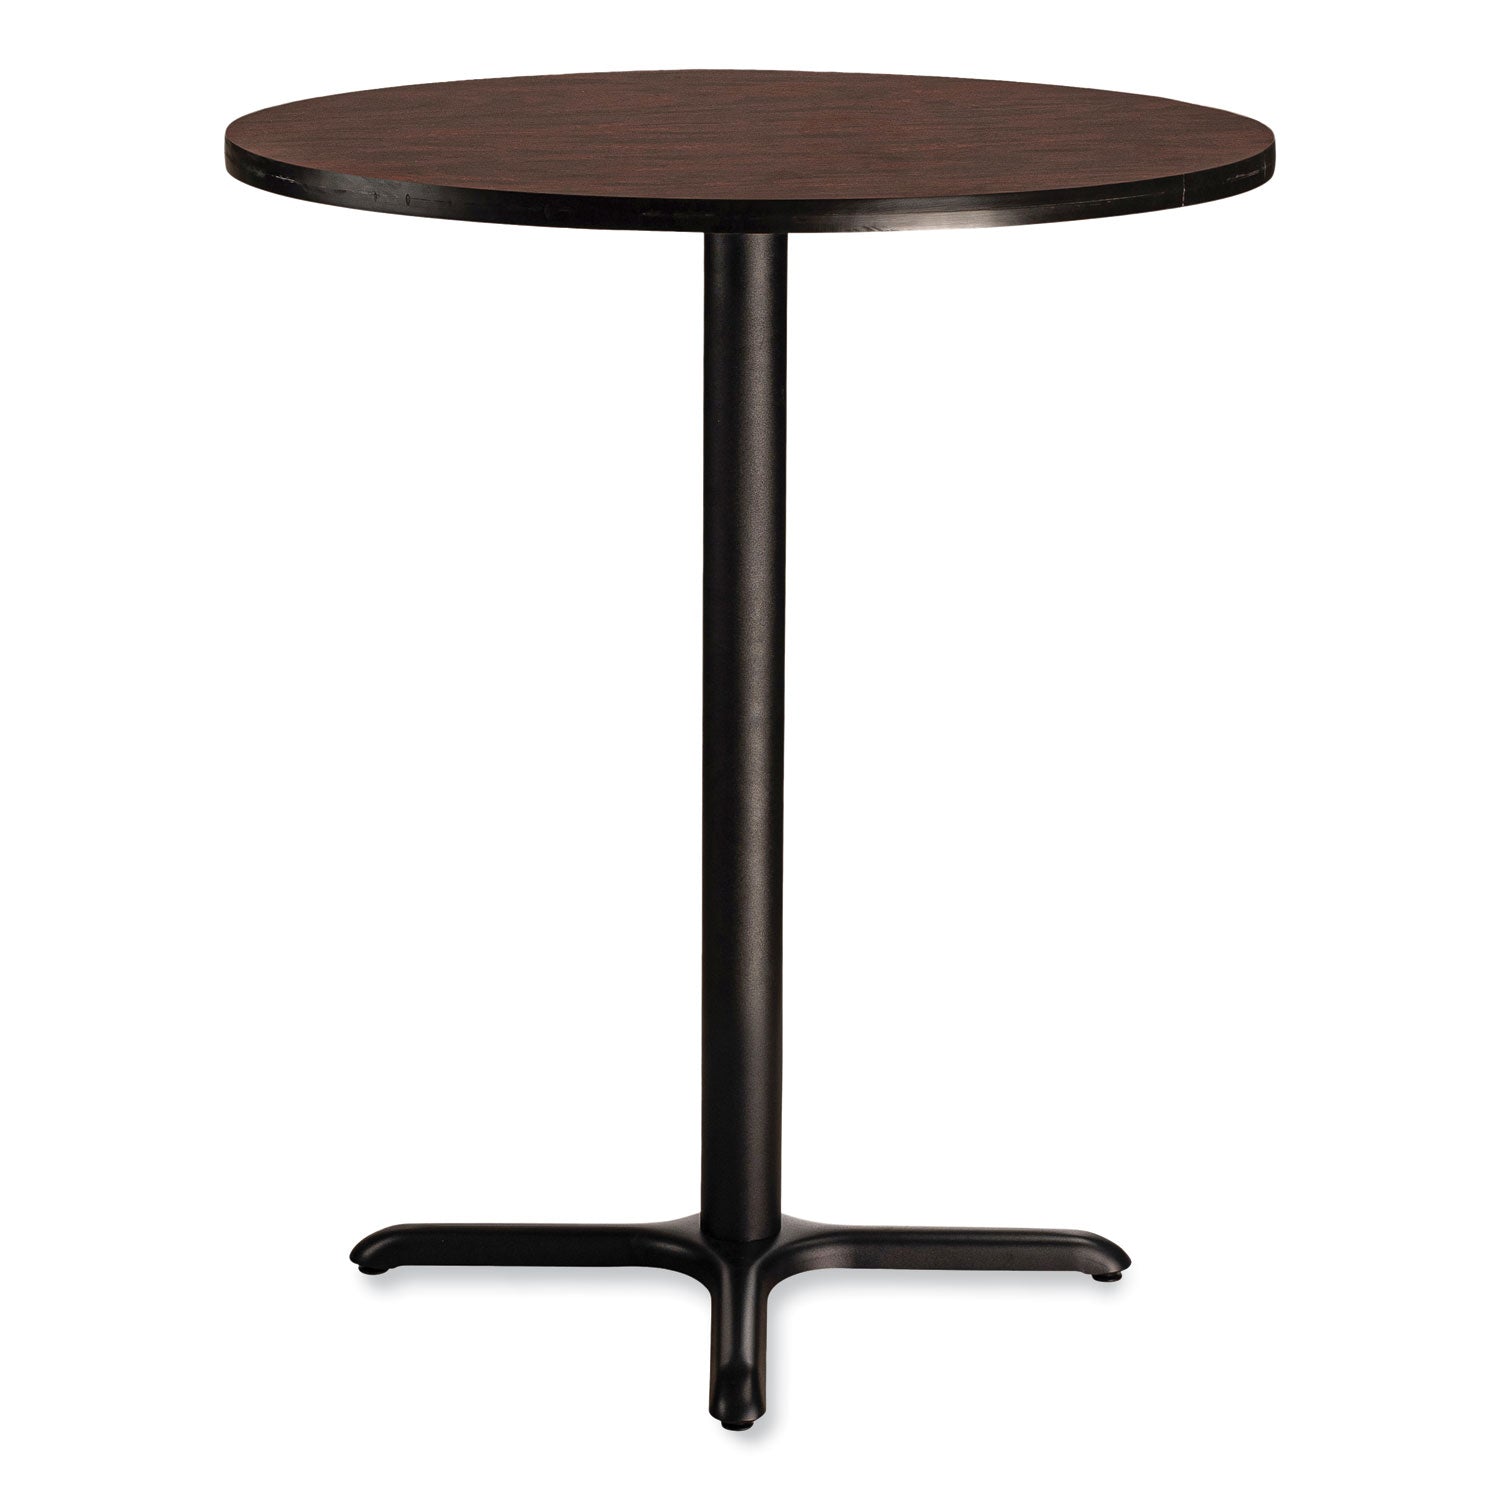 cafe-table-36-diameter-x-42h-round-top-x-base-mahogany-top-black-base-ships-in-7-10-business-days_npsct13636xb1my - 2